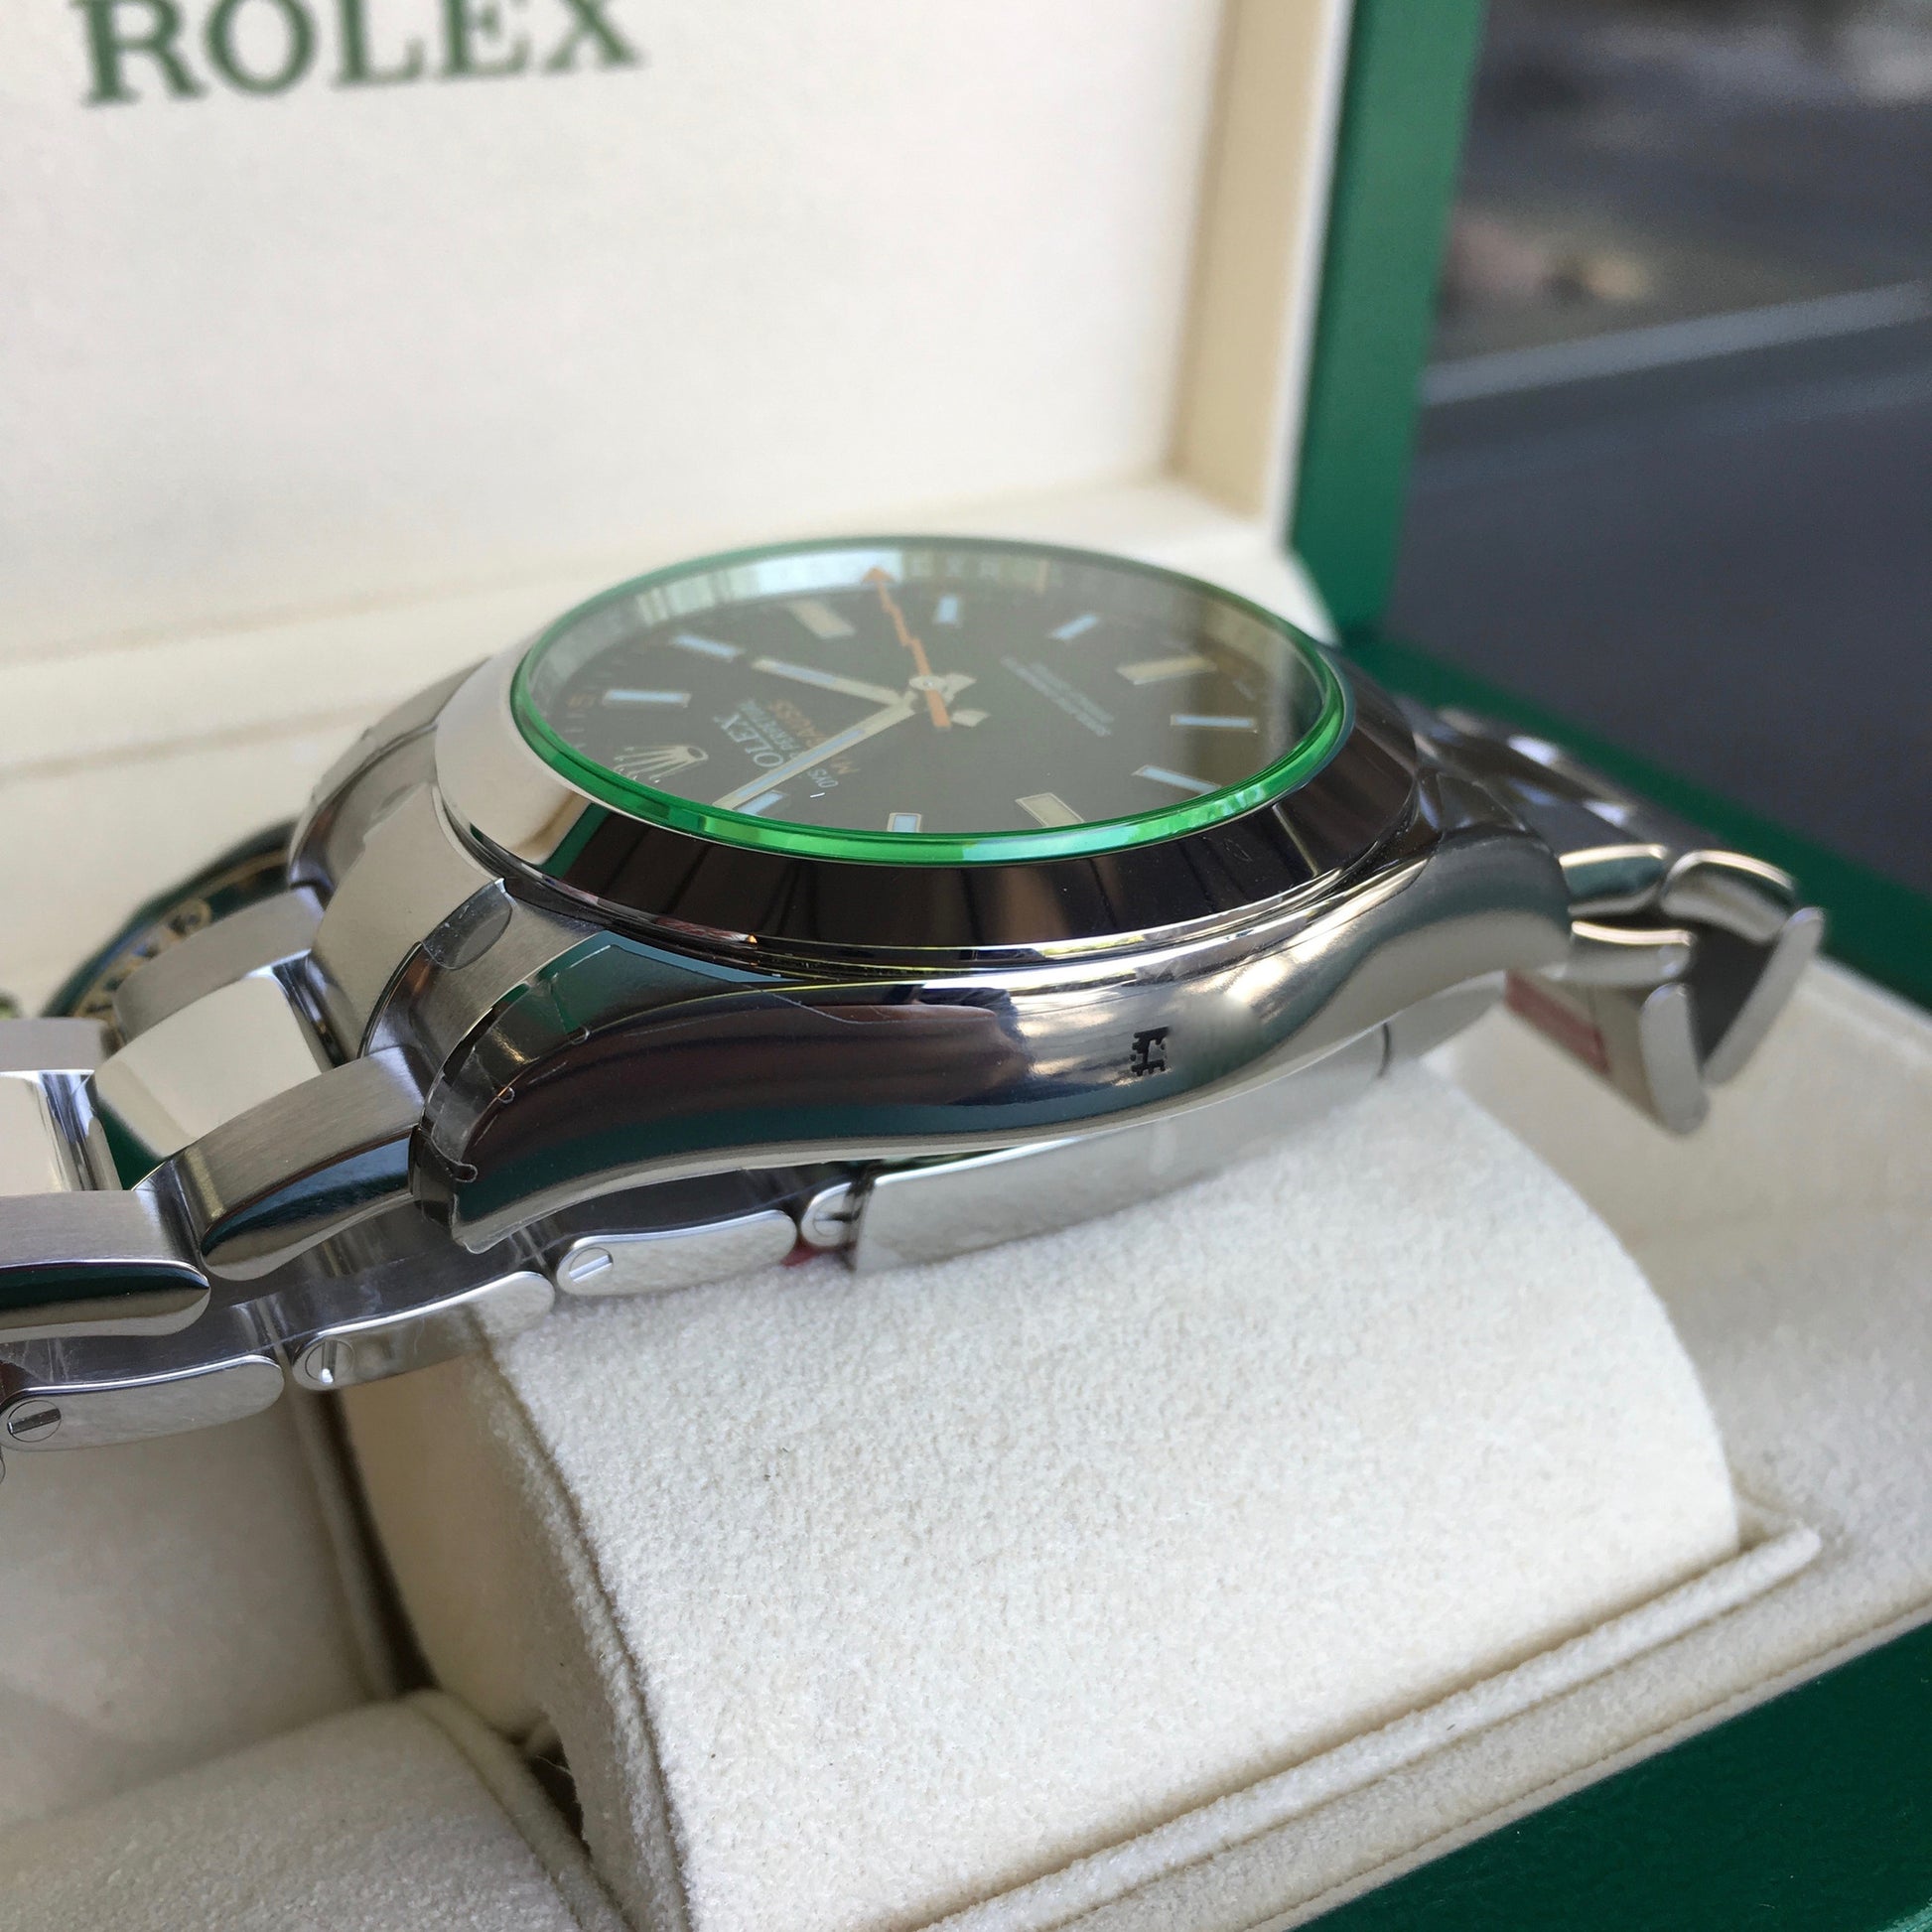 Rolex Milgauss Green 116400GV Stainless Steel Wristwatch Box Papers Circa 2017 - Hashtag Watch Company